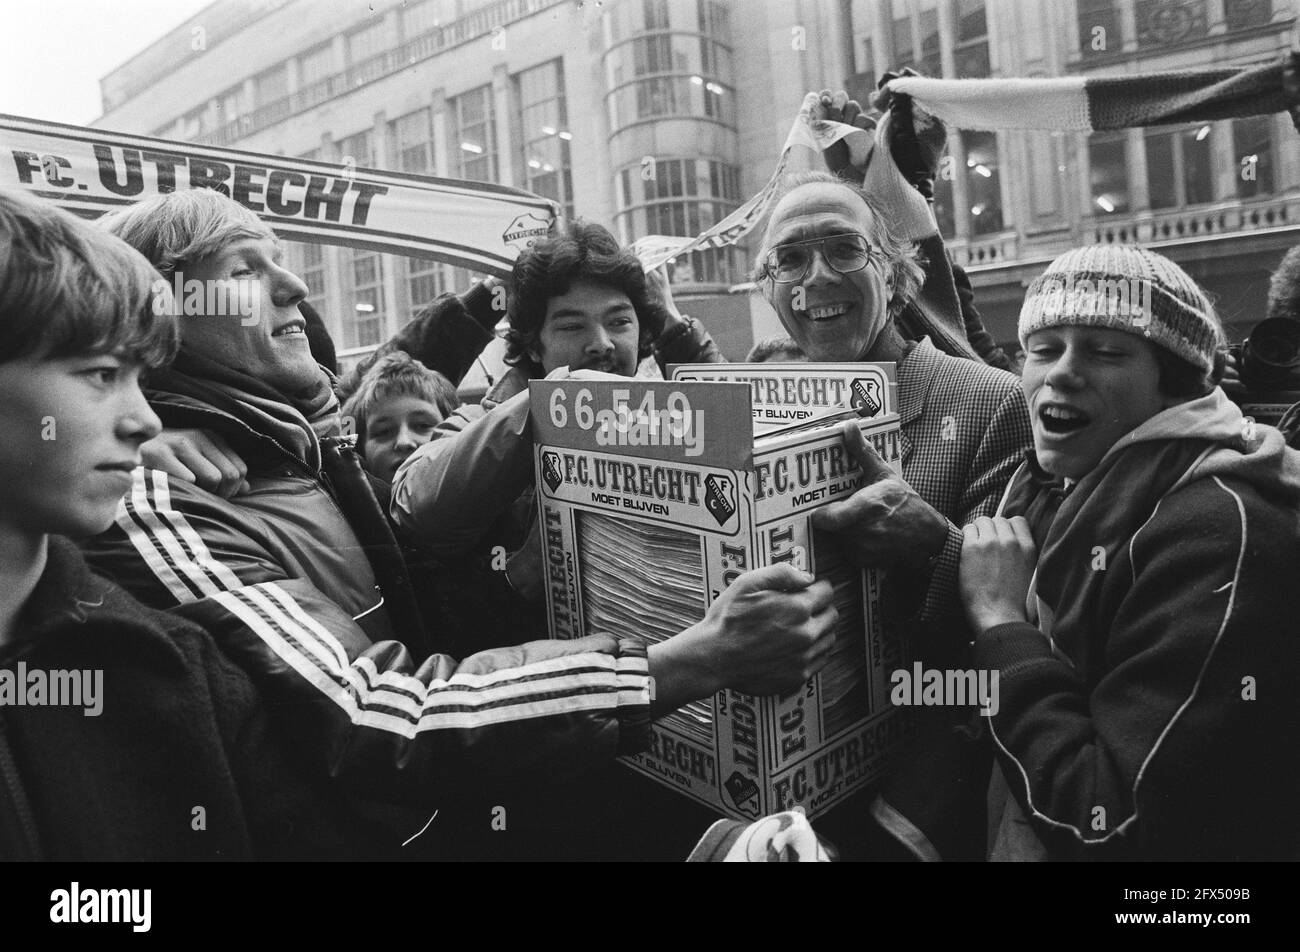 FC Utrecht supporters demonstrate for retention of club. Goalkeeper Hans van Breukelen offers signatures to alderman Pot (r.), 23 December 1981, HANDSIGNALS, demonstrations, sports, soccer, The Netherlands, 20th century press agency photo, news to remember, documentary, historic photography 1945-1990, visual stories, human history of the Twentieth Century, capturing moments in time Stock Photo